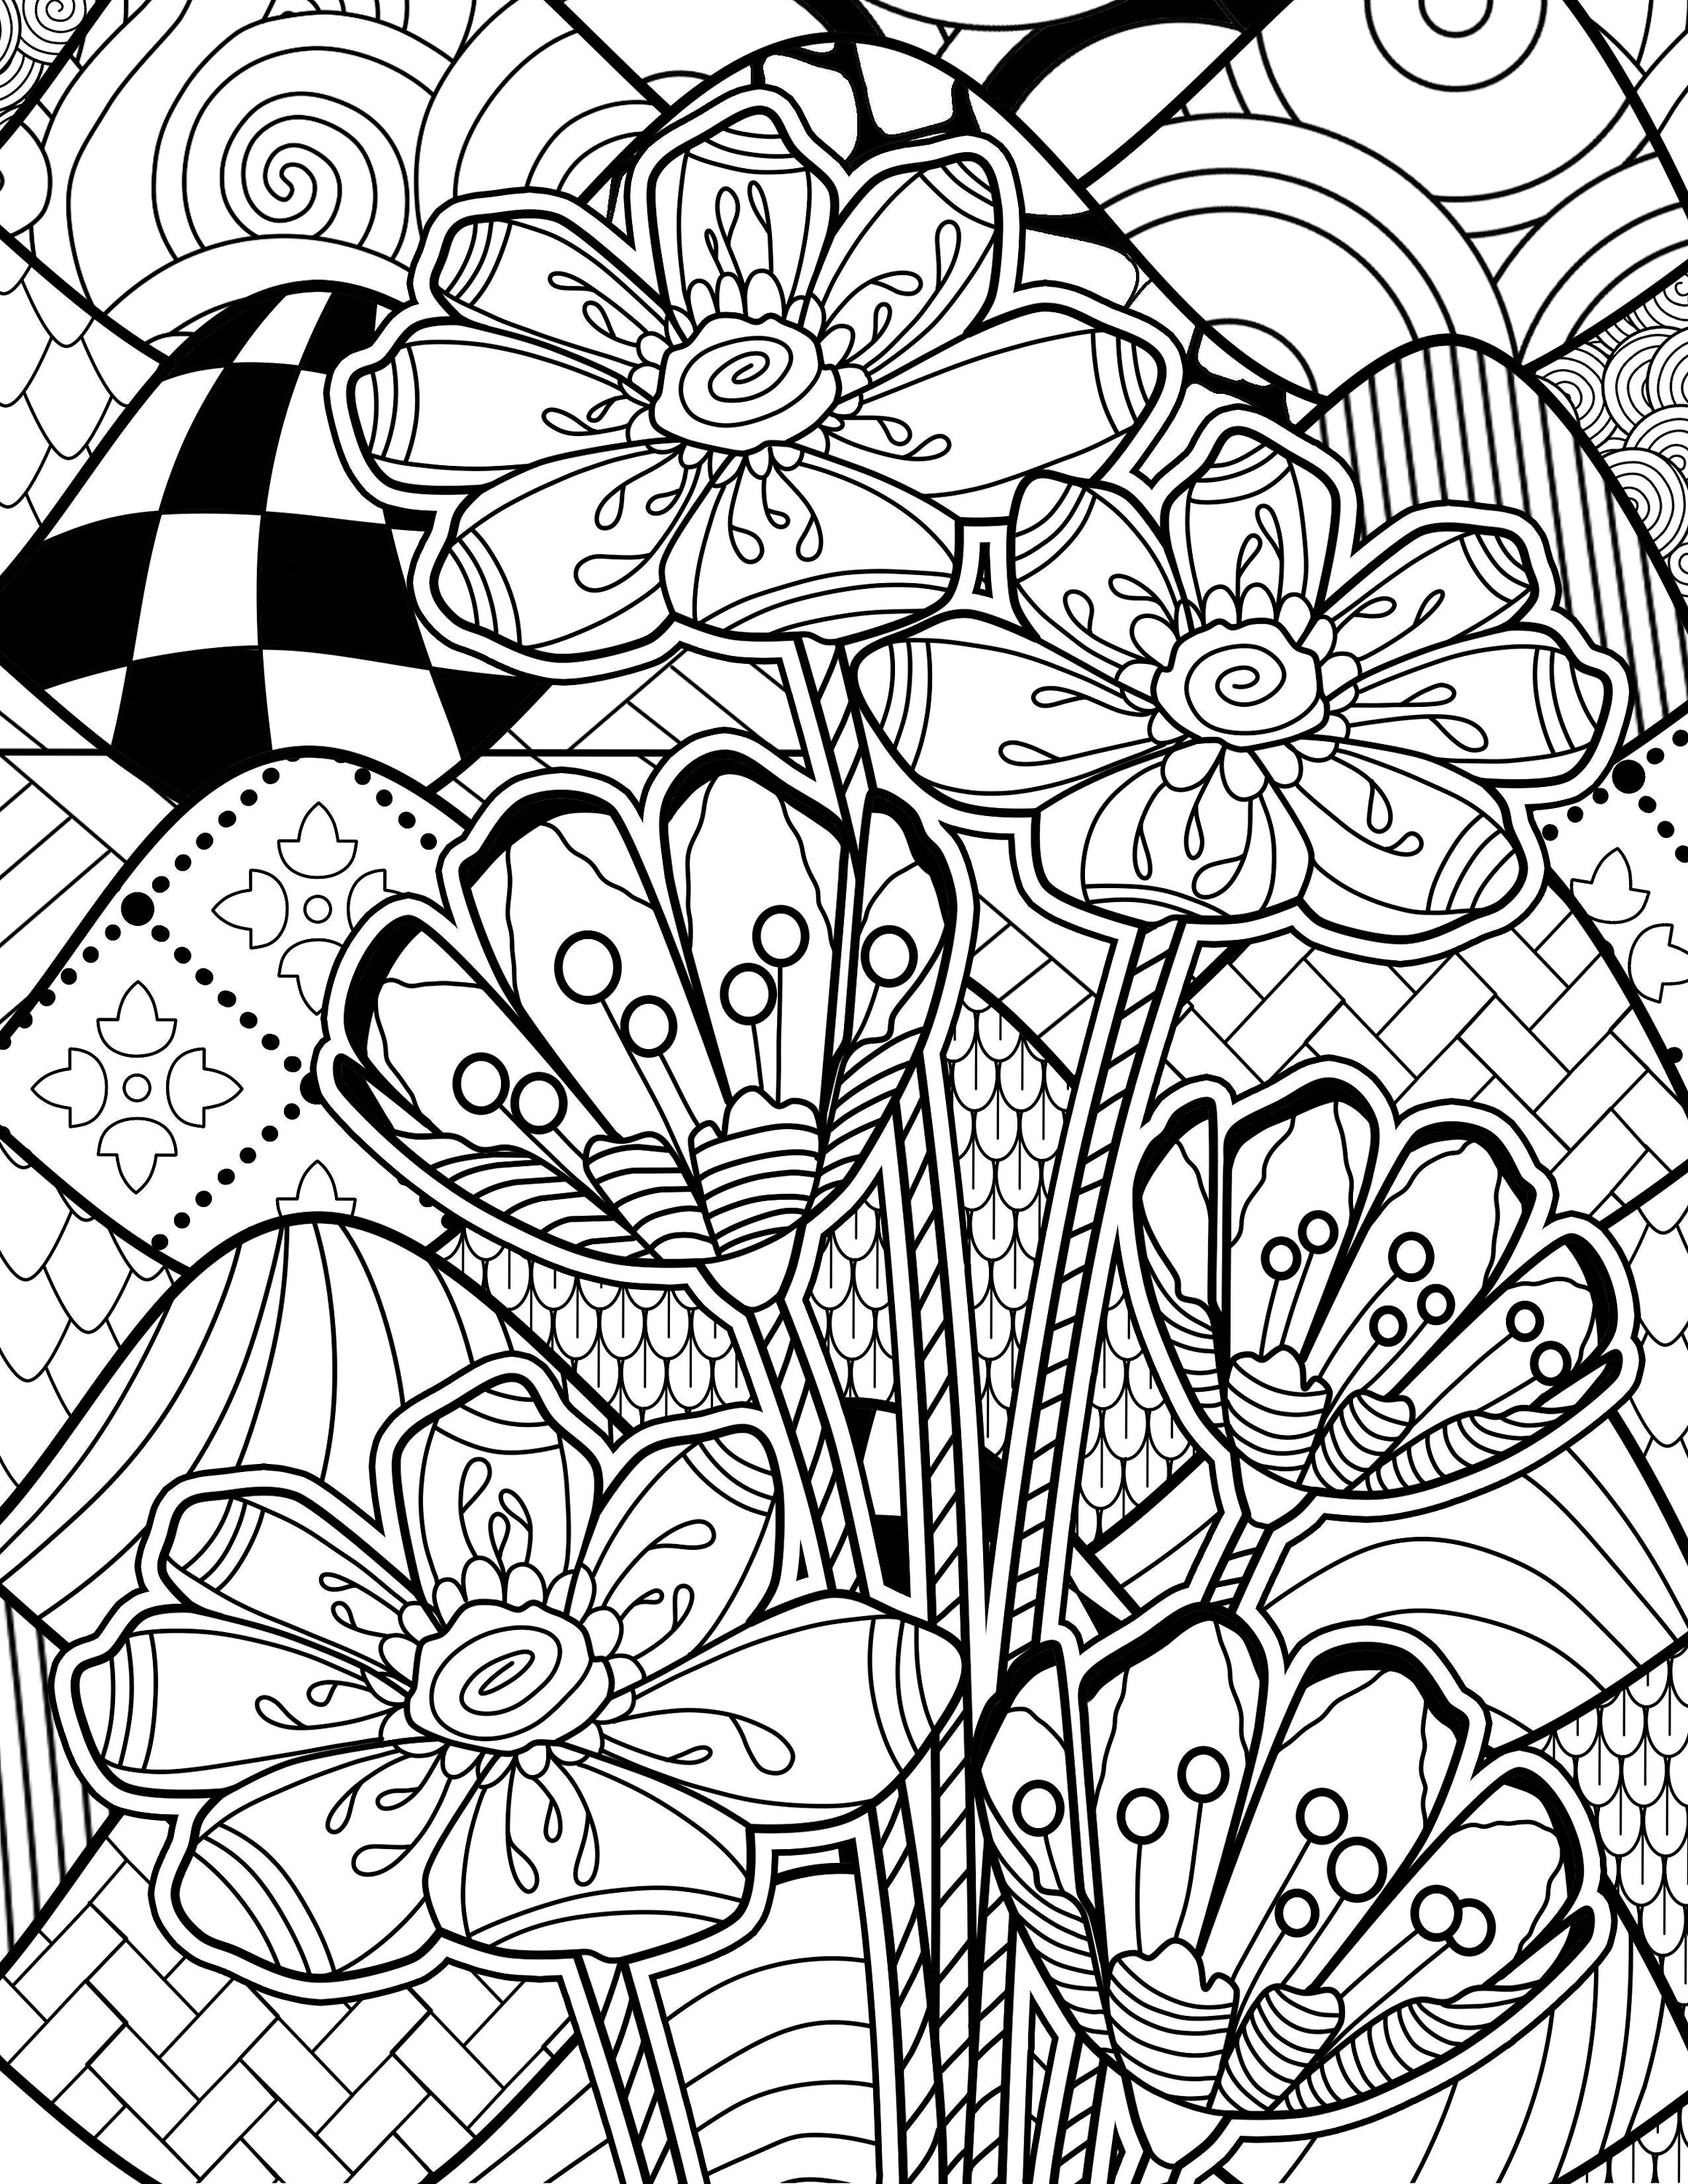 Adult Coloring Pages | Etsy